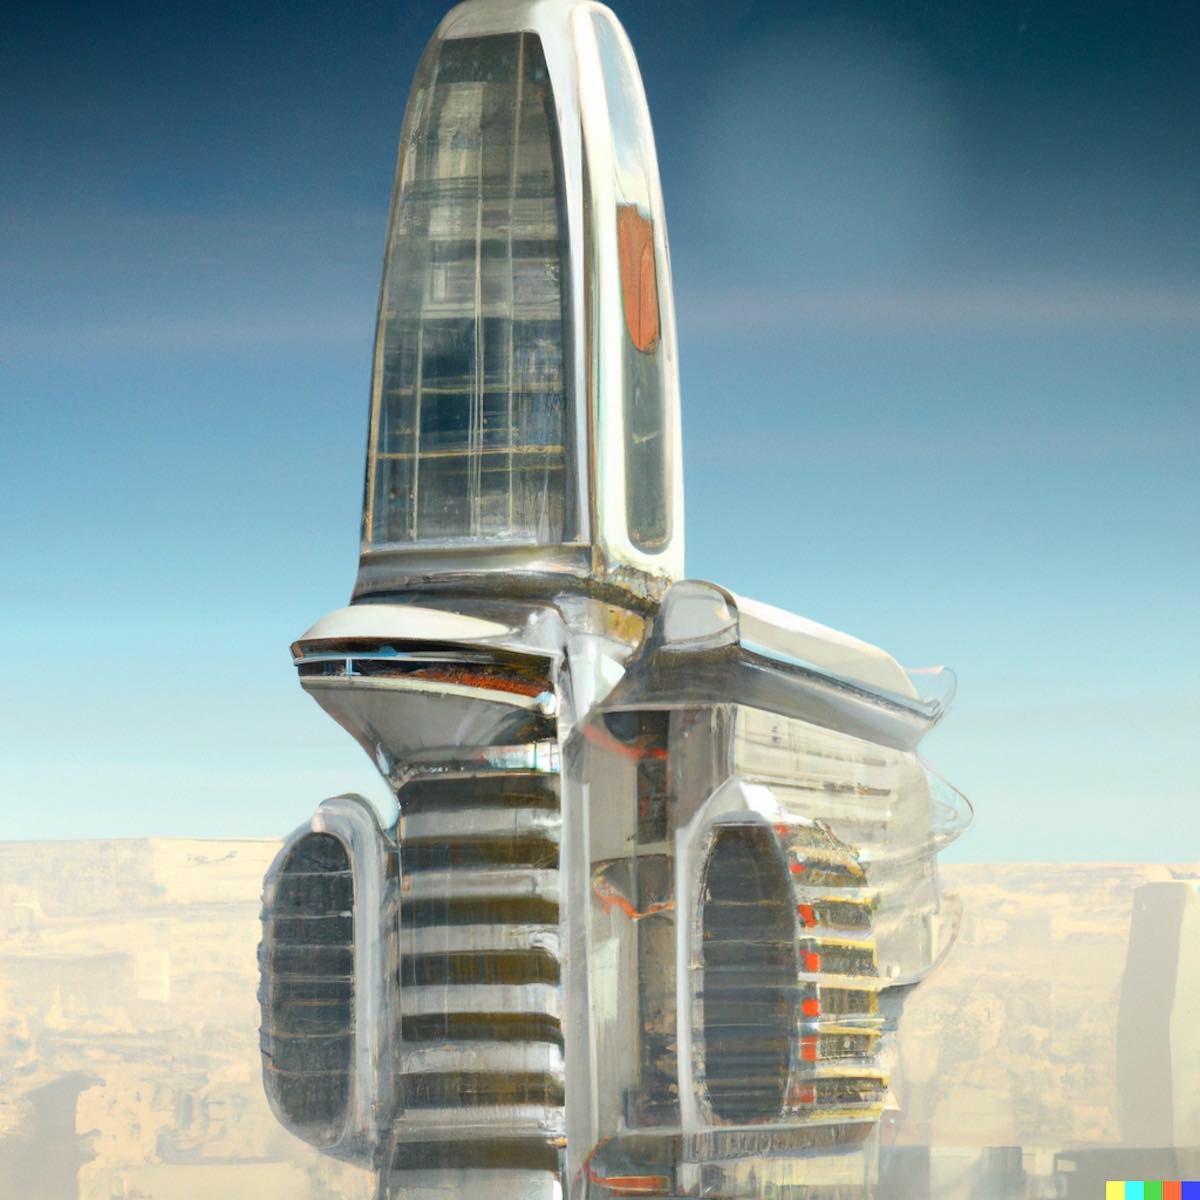 "A futuristic skyscraper in Mars colony in 3040 year owned by the biggest Venture Capital in history"
